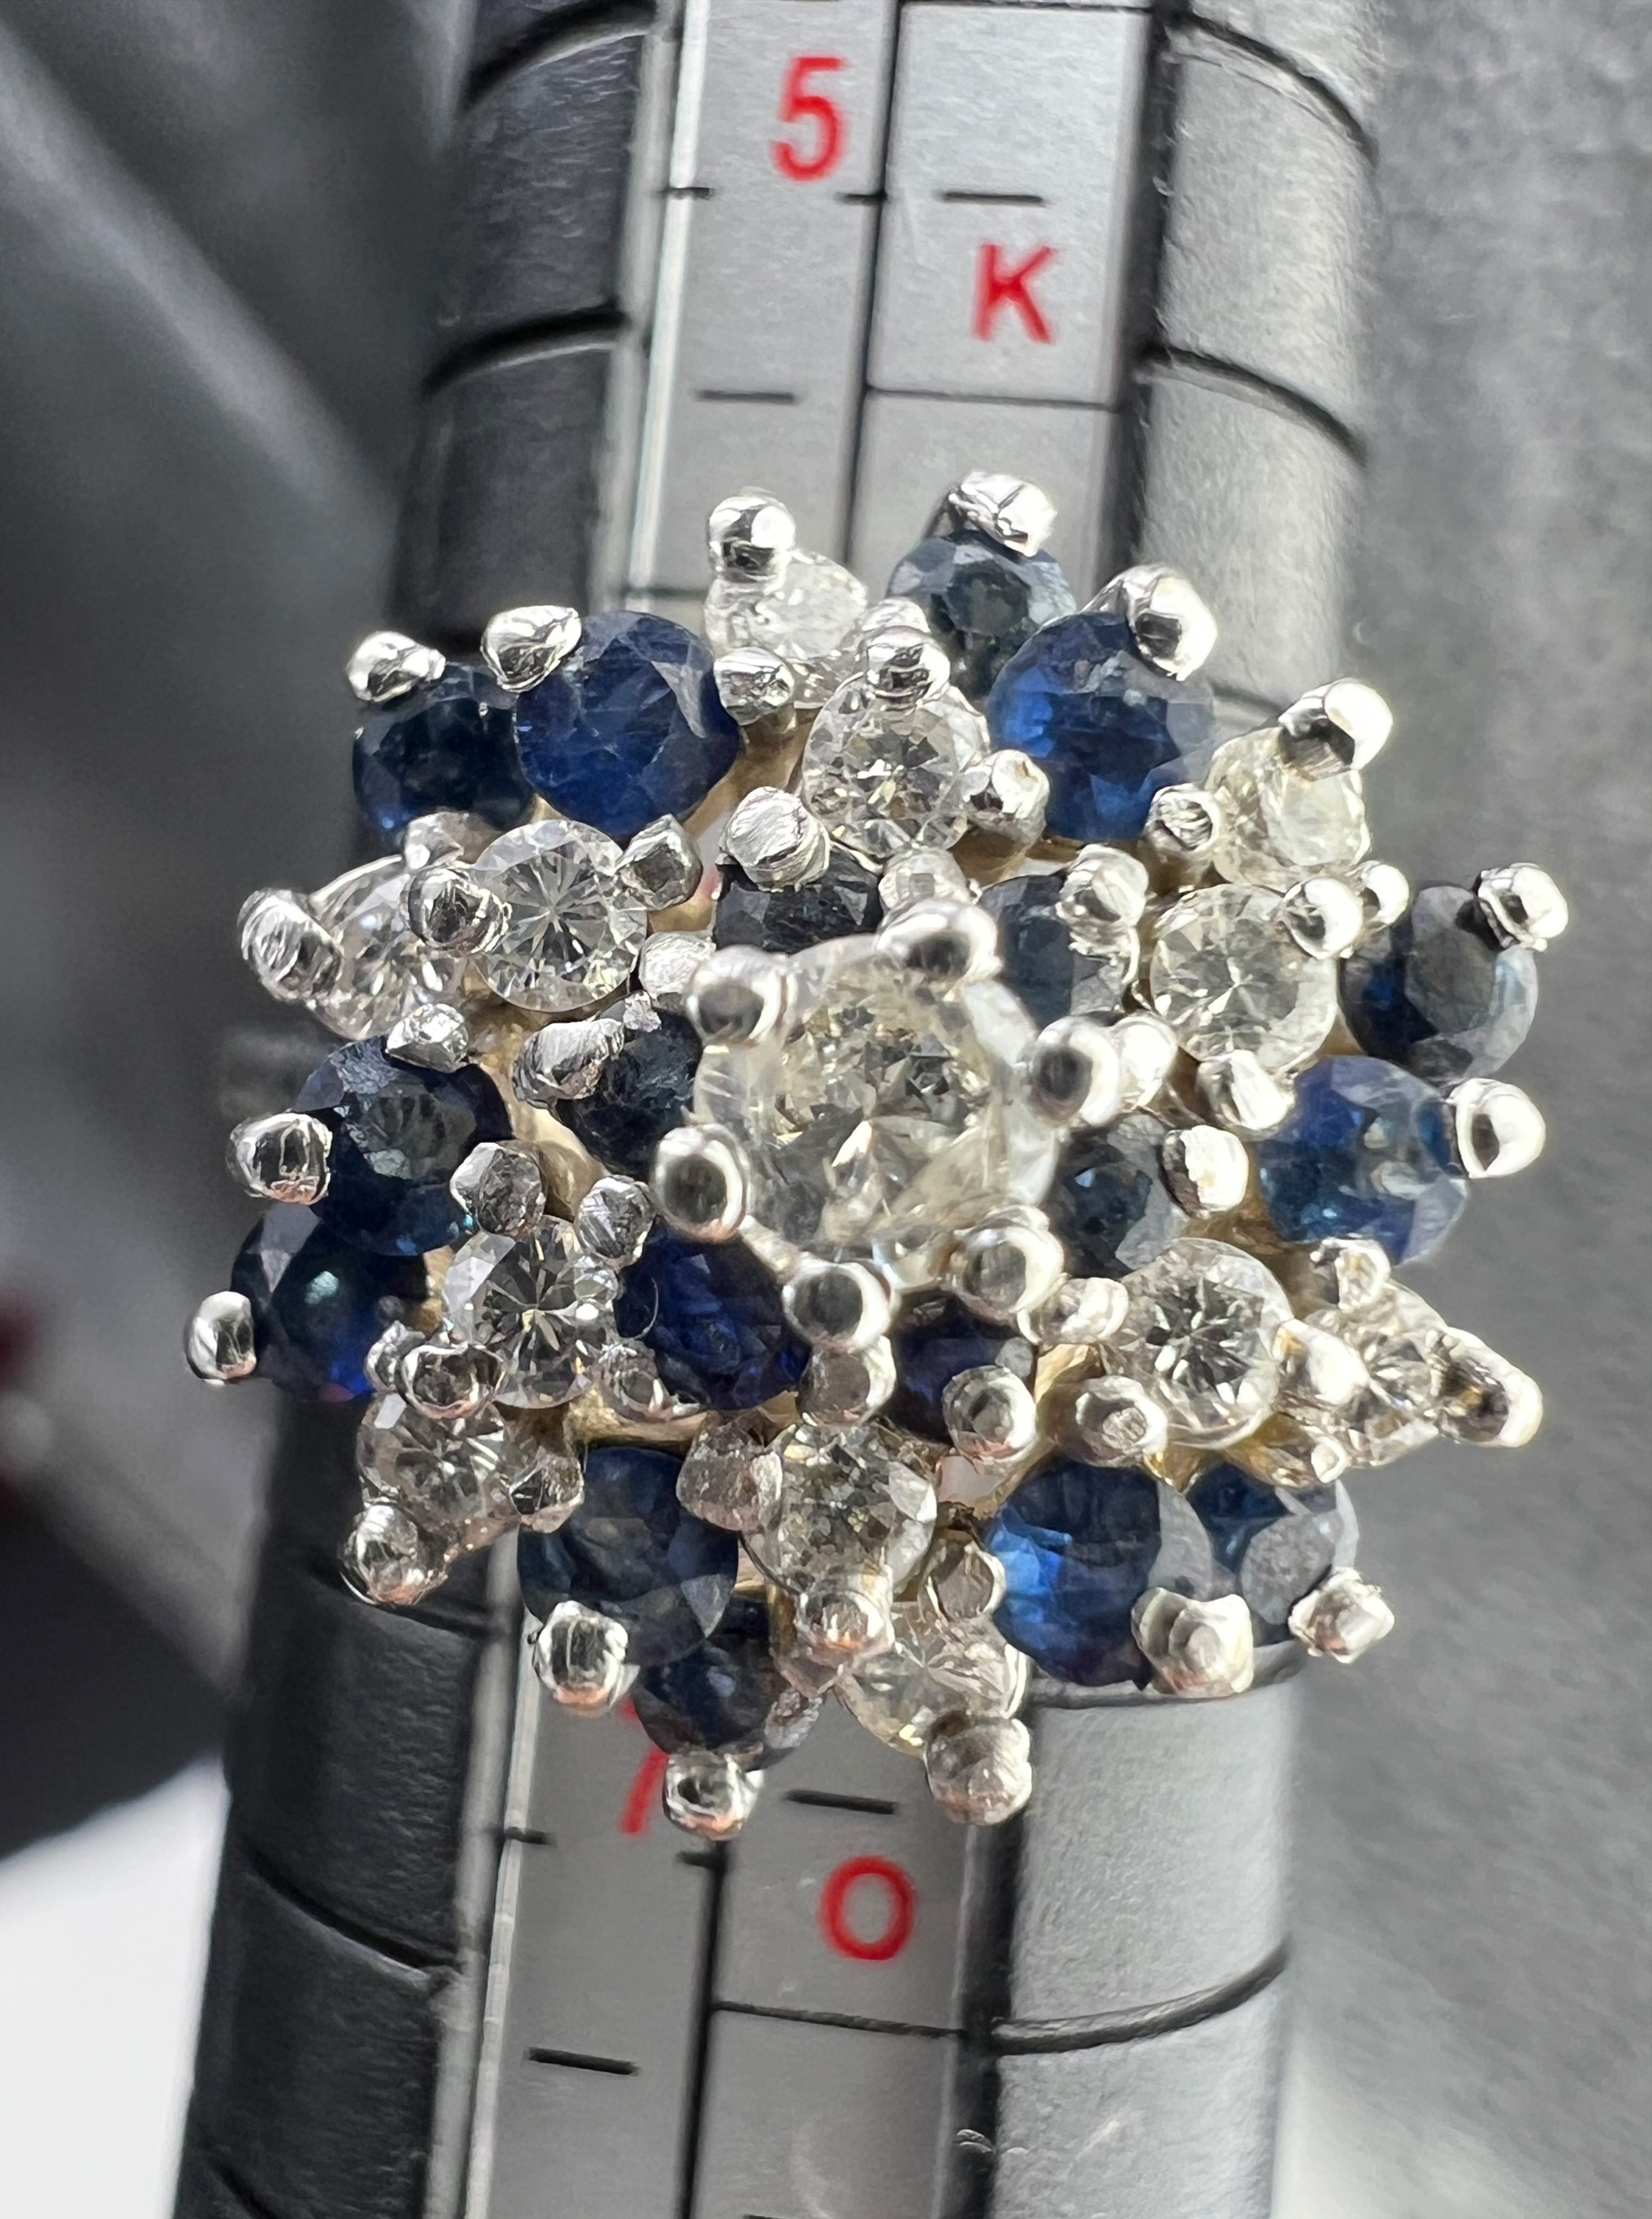 Ladies' ring. 585 white gold with diamonds and sapphires. - Image 6 of 7